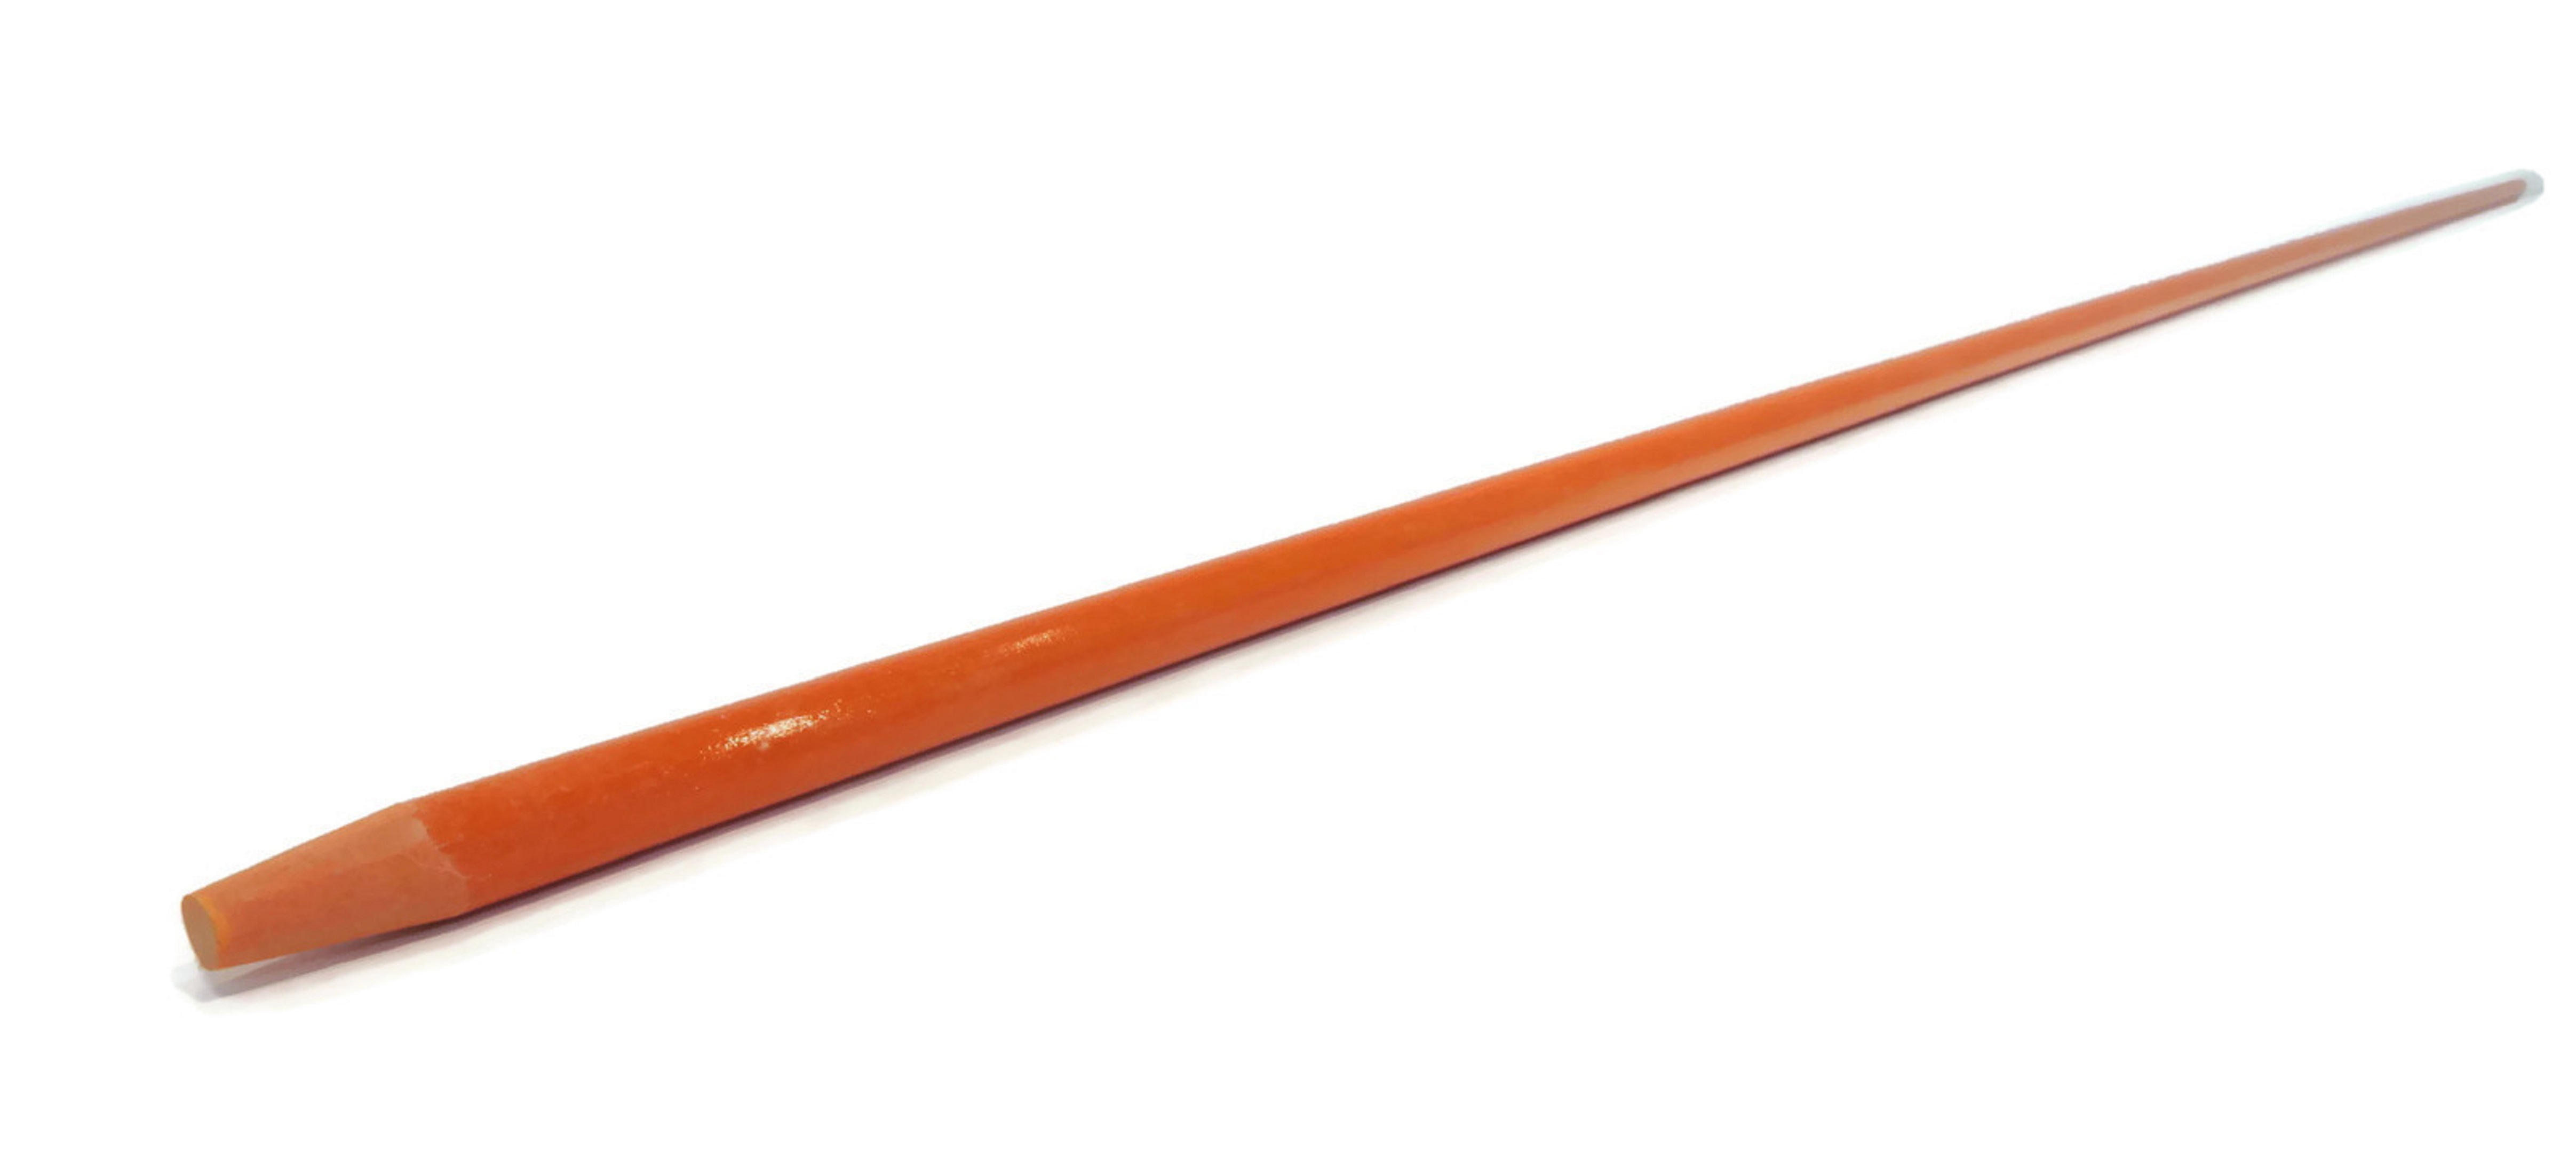 The ROP Shop | Pack of 15 Orange Pathway Sticks 48 inches, 1/4 inch for Lawn, Yard, & Grass Driveway - image 2 of 6